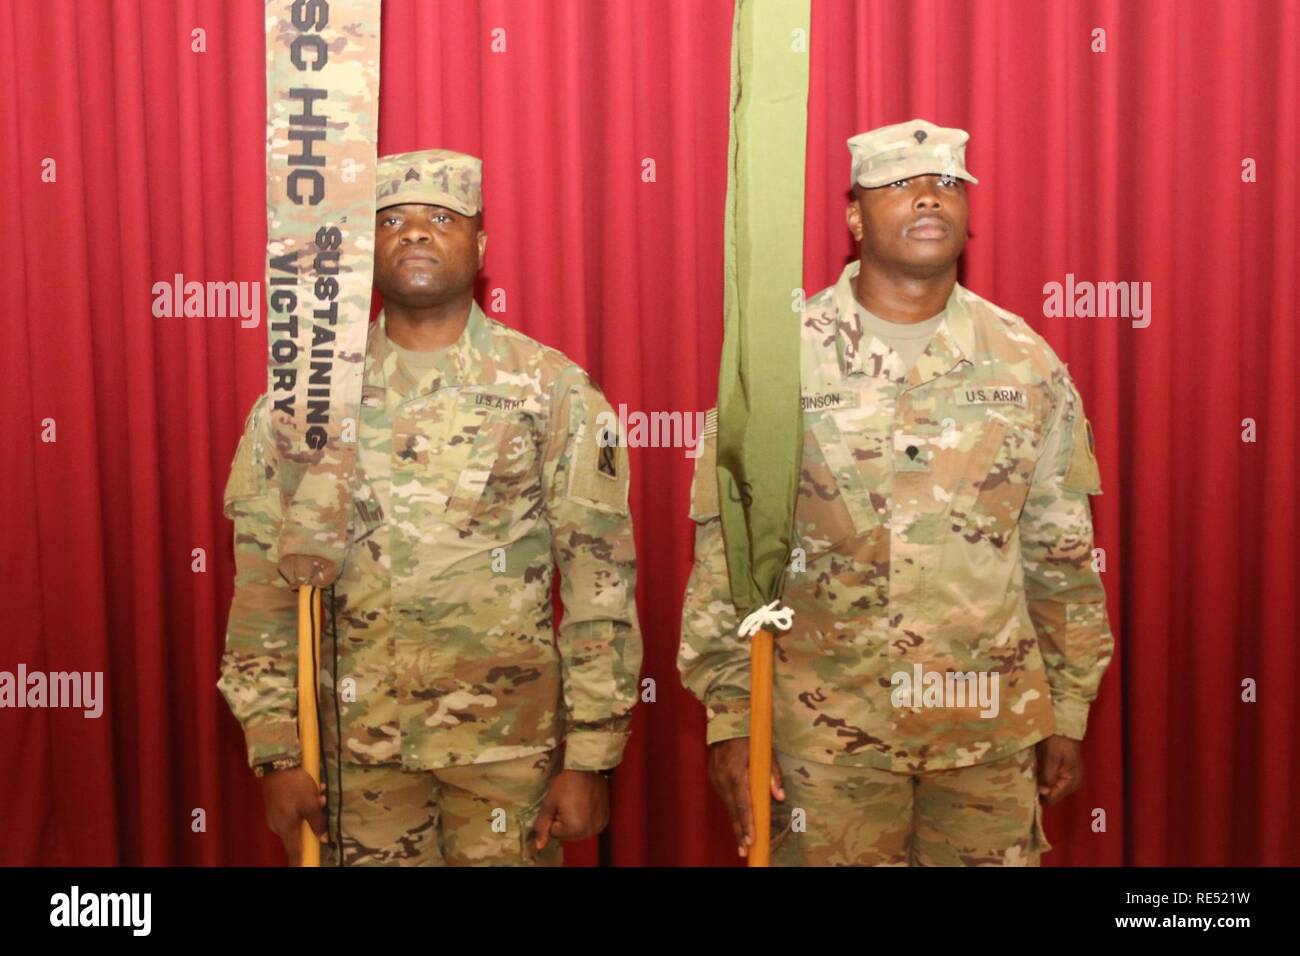 Soldiers of the 184th Sustainment Command and 143d Sustainment Command stand with guidons during the transfer of authority ceremony Jan. 2, 2019, at Camp Arifjan, Kuwait. Stock Photo